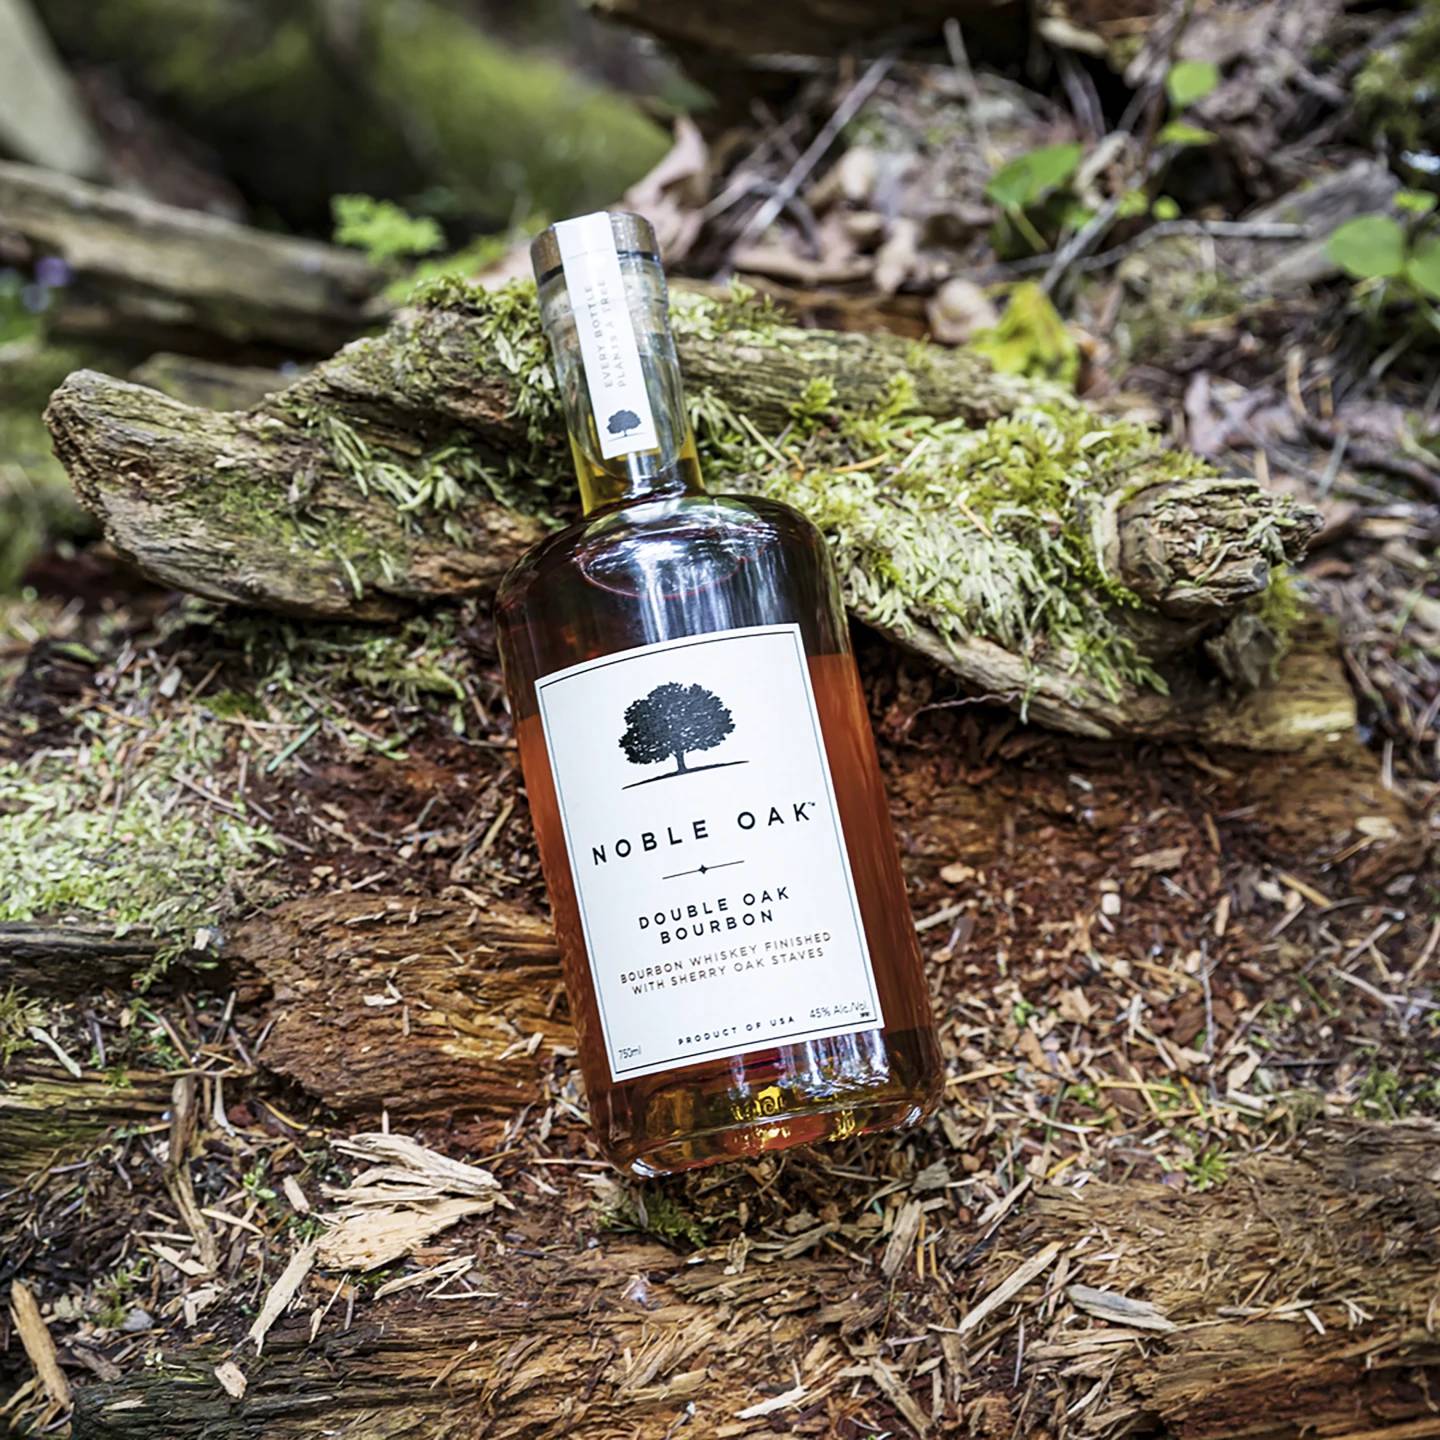 This image provided by Noble Oak shows a 750ml bottle of Noble Oak bourbon. For every bottle sold, the company plants a tree in partnership with One Tree Planted, a Vermont-based reforestation nonprofit.